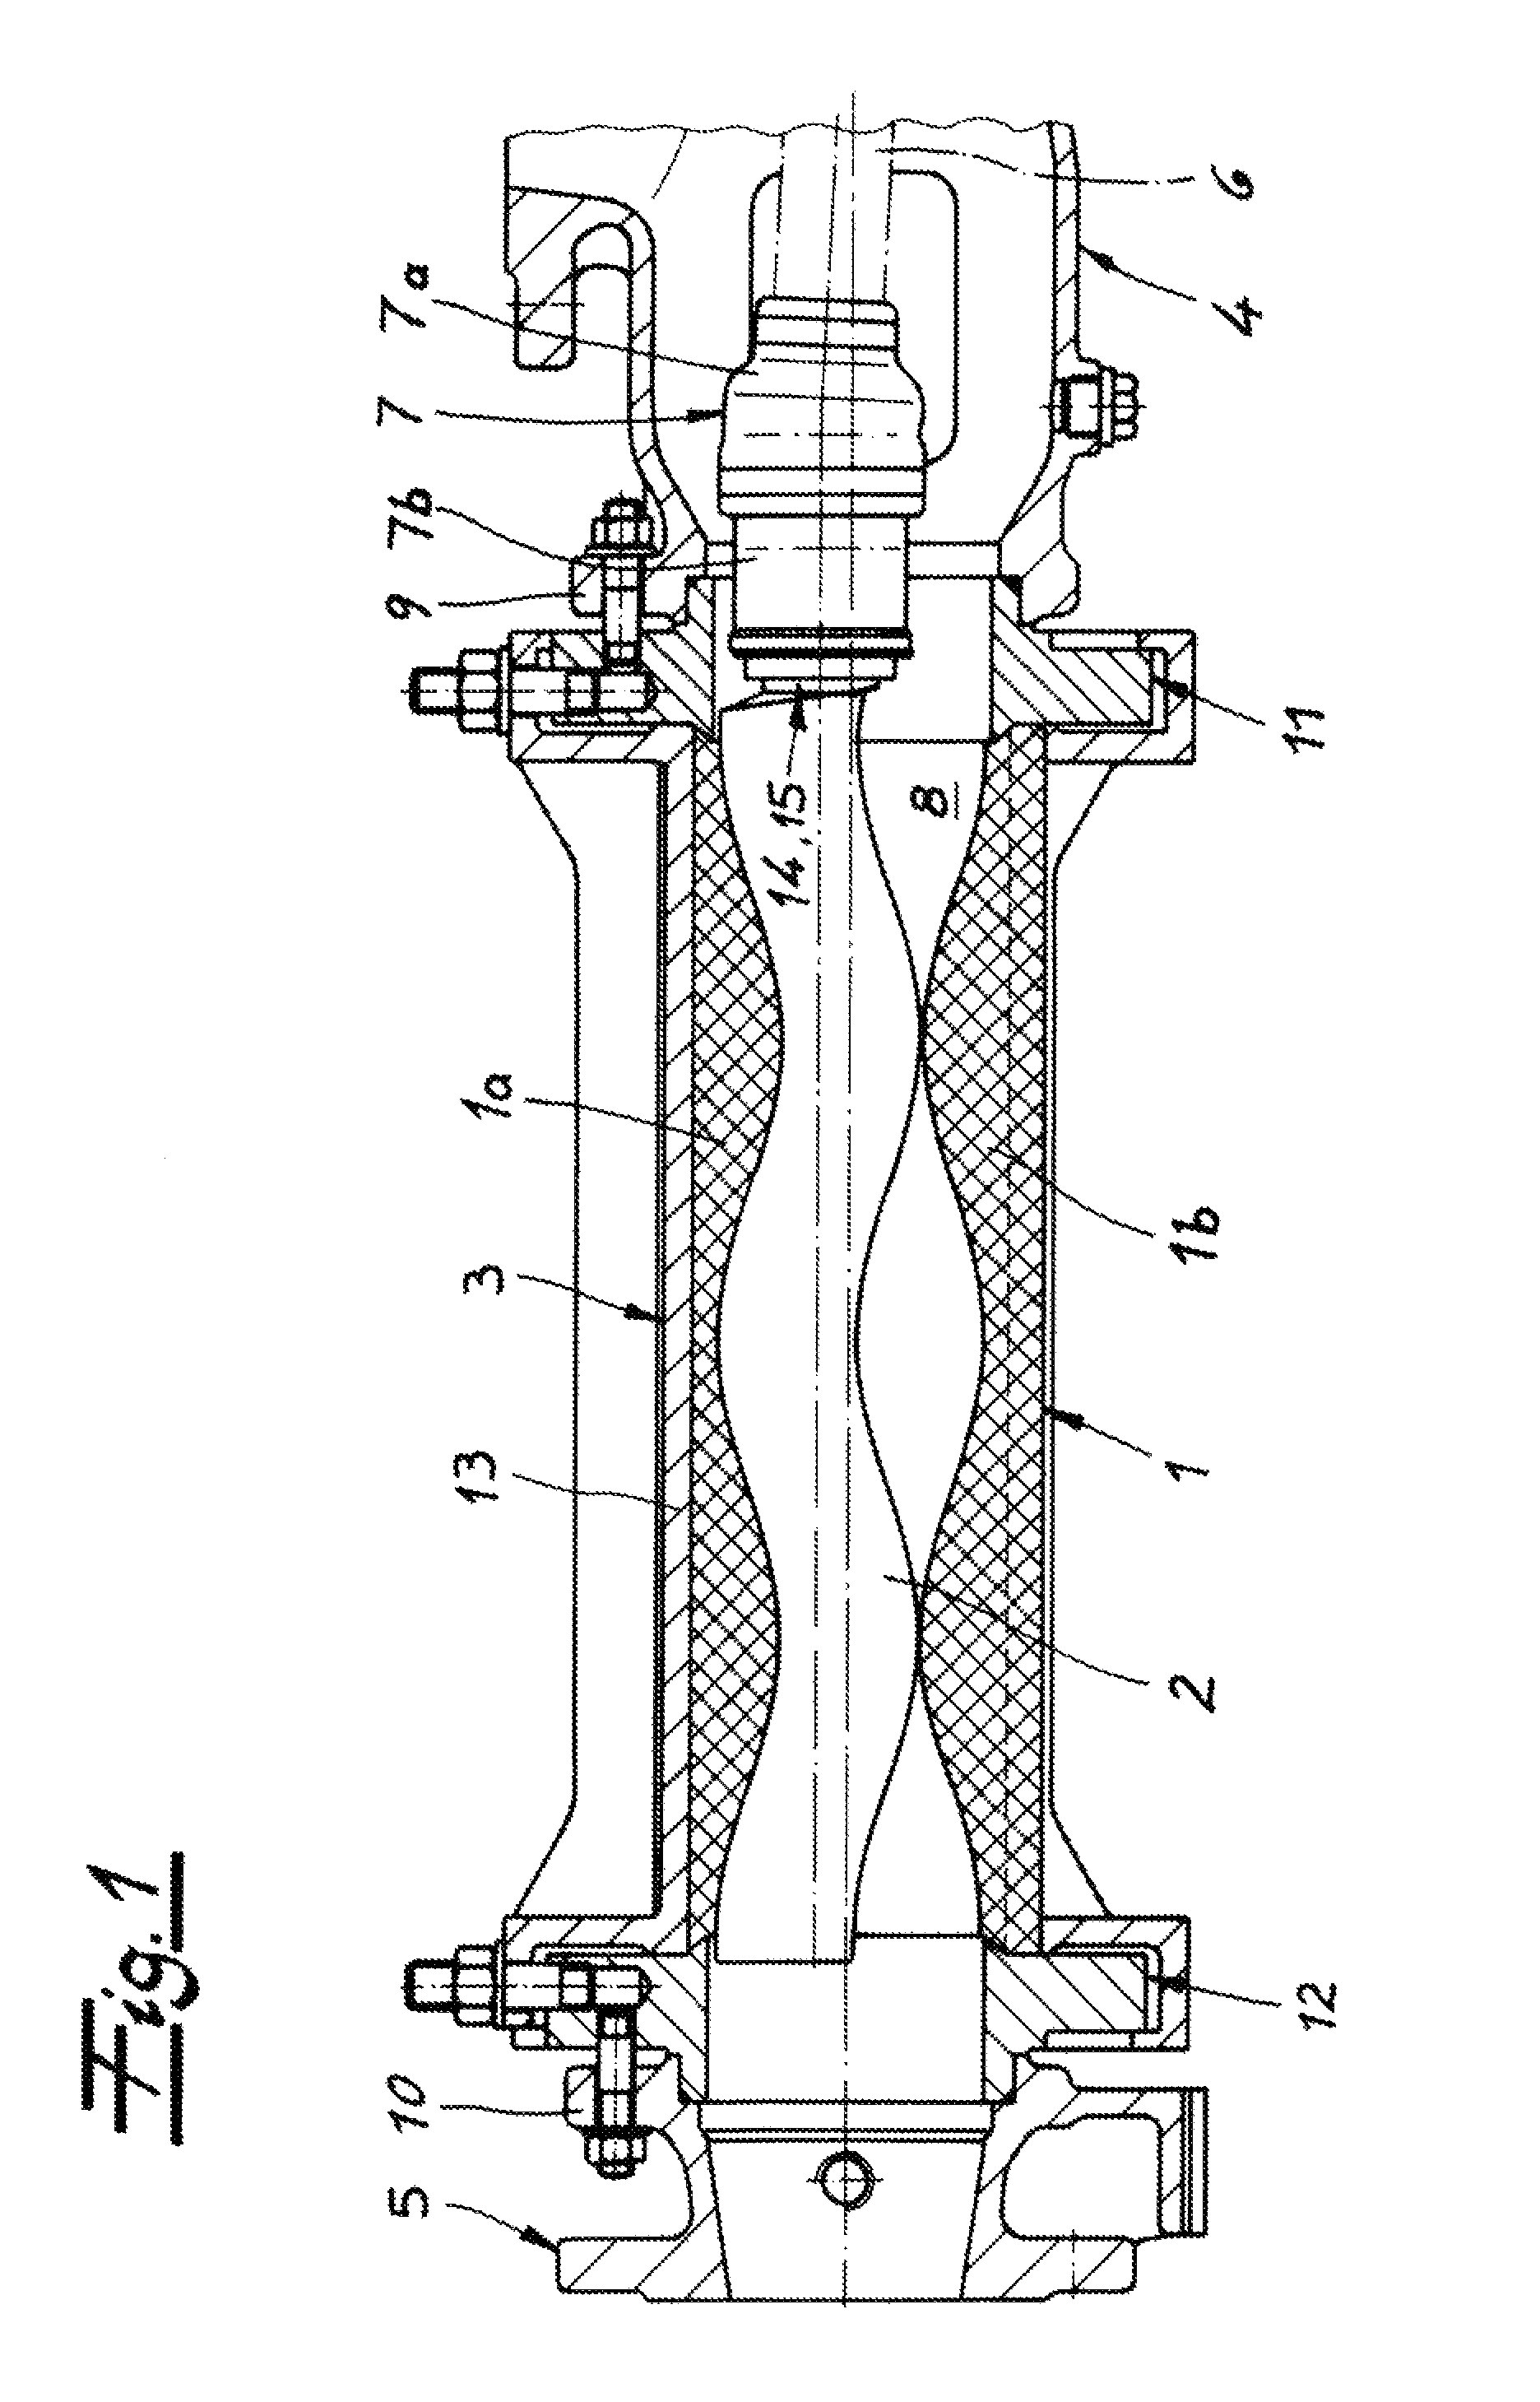 Eccentric-screw pump with replaceable rotor and stator